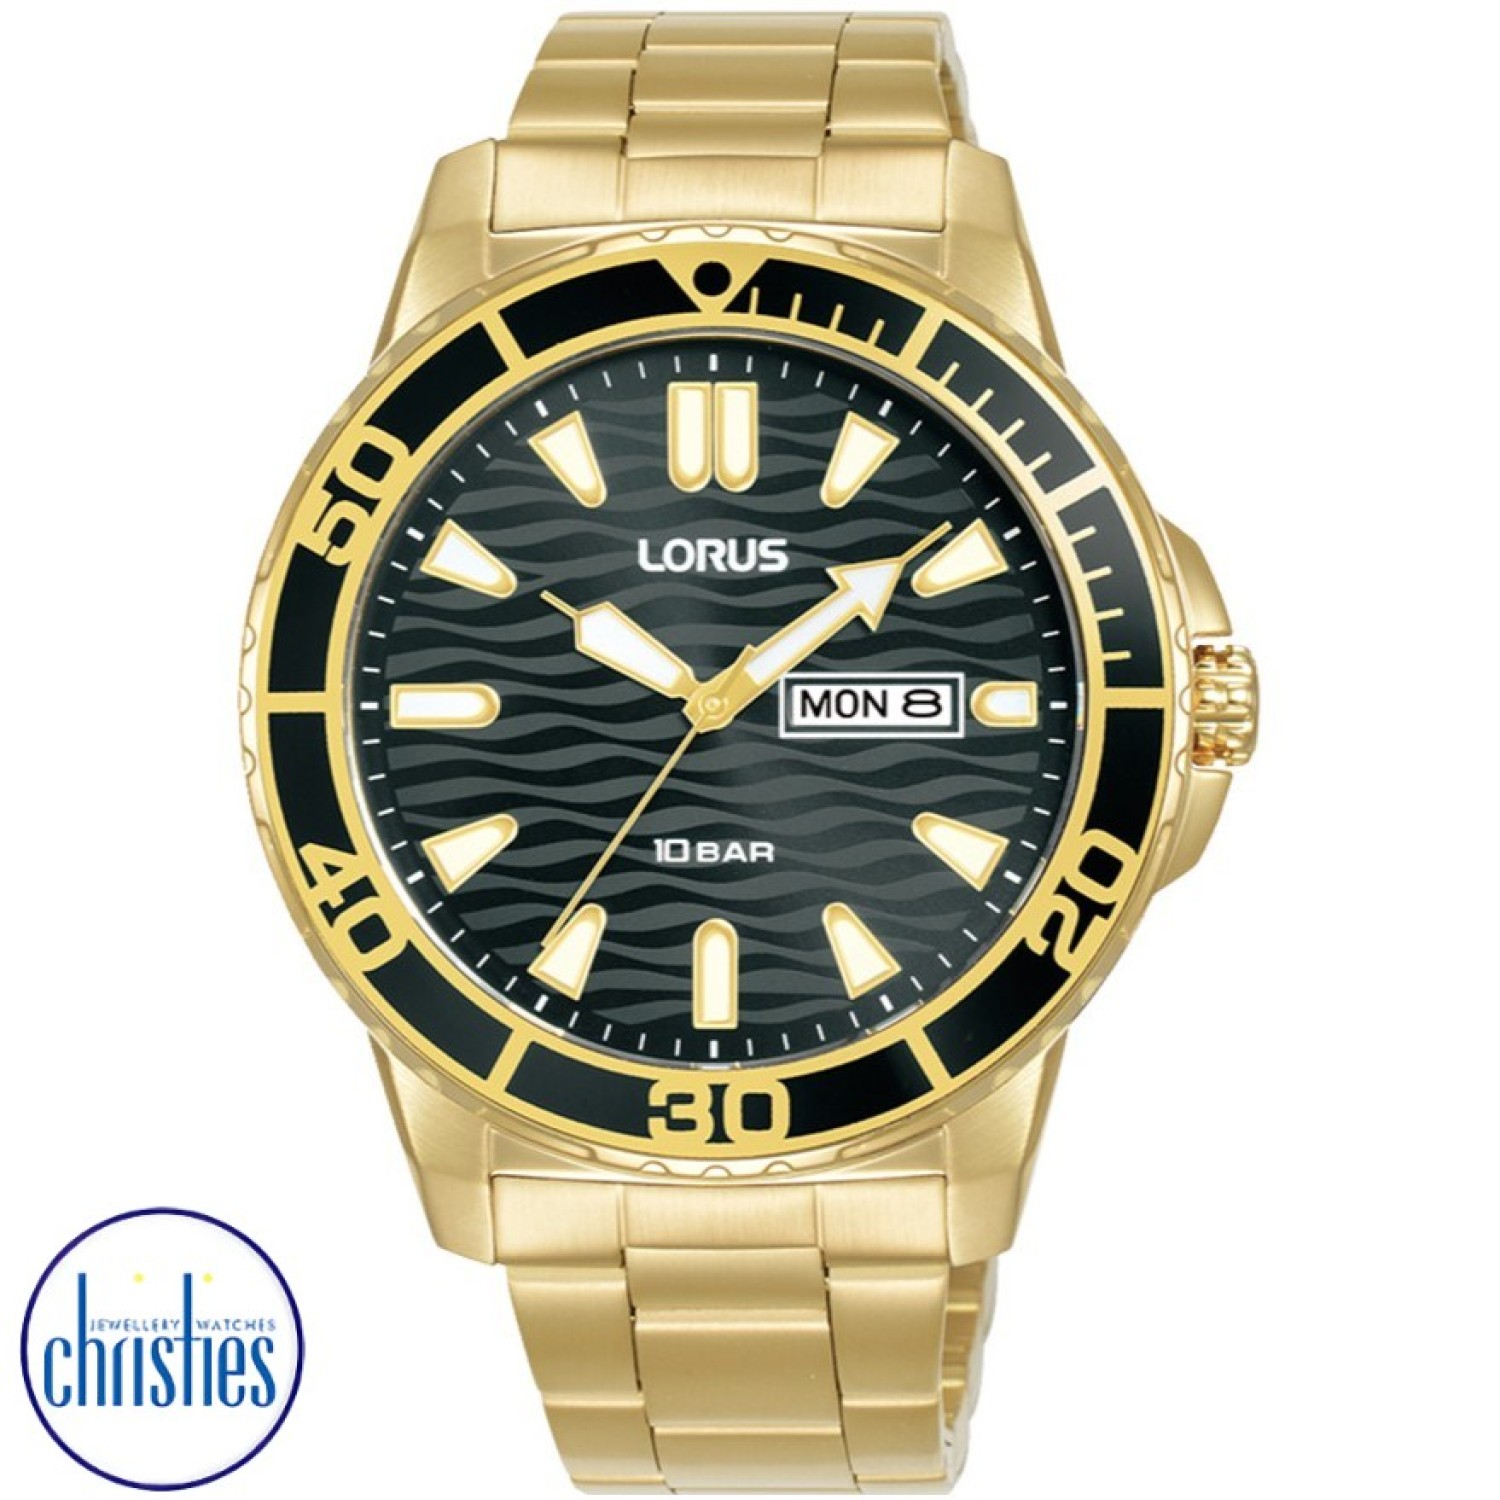 RH362AX-9 Lorus Gents Sports Quartz RH362AX-9 Lorus by Seiko Auckland s offers a diverse range of watch styles, including analog, digital, sports, and dress watches.